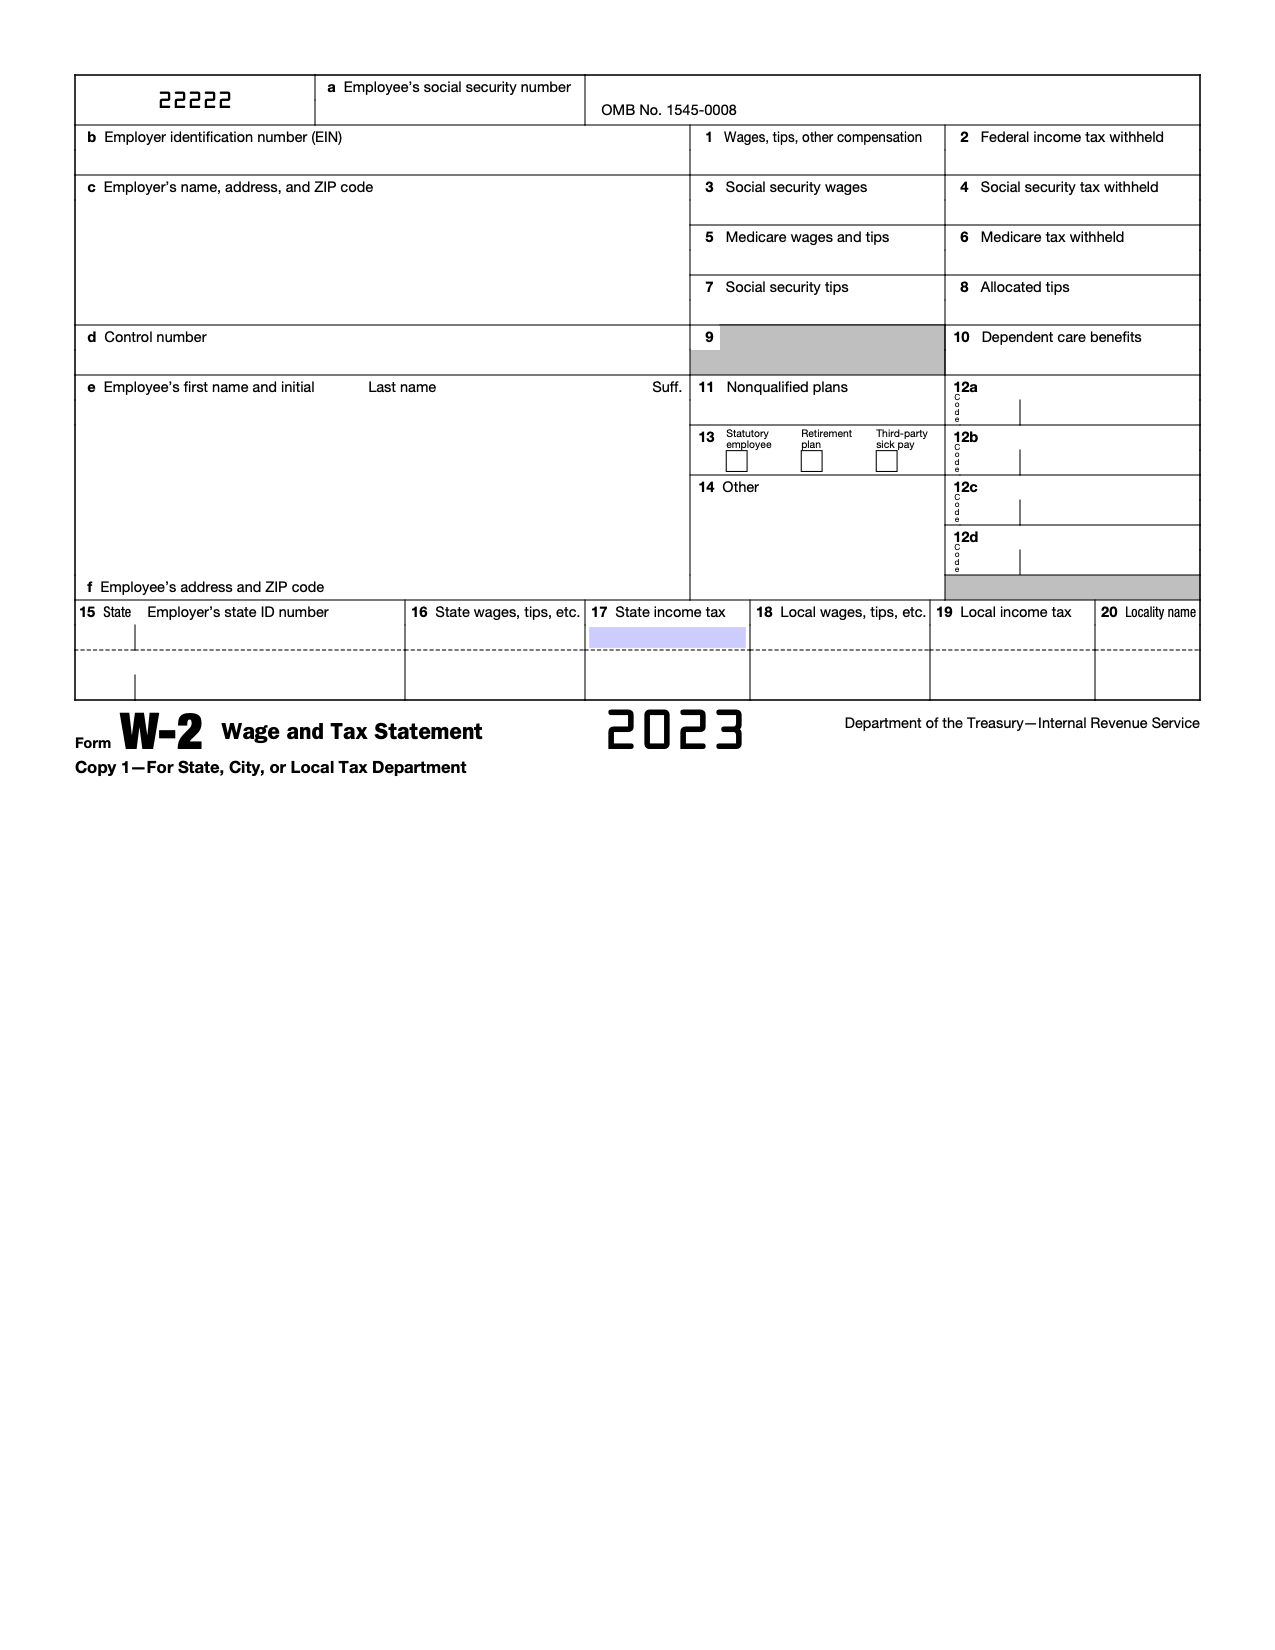 Free Irs Form W-2 | Wage And Tax Statement - Pdf – Eforms pertaining to W2 Form For Free